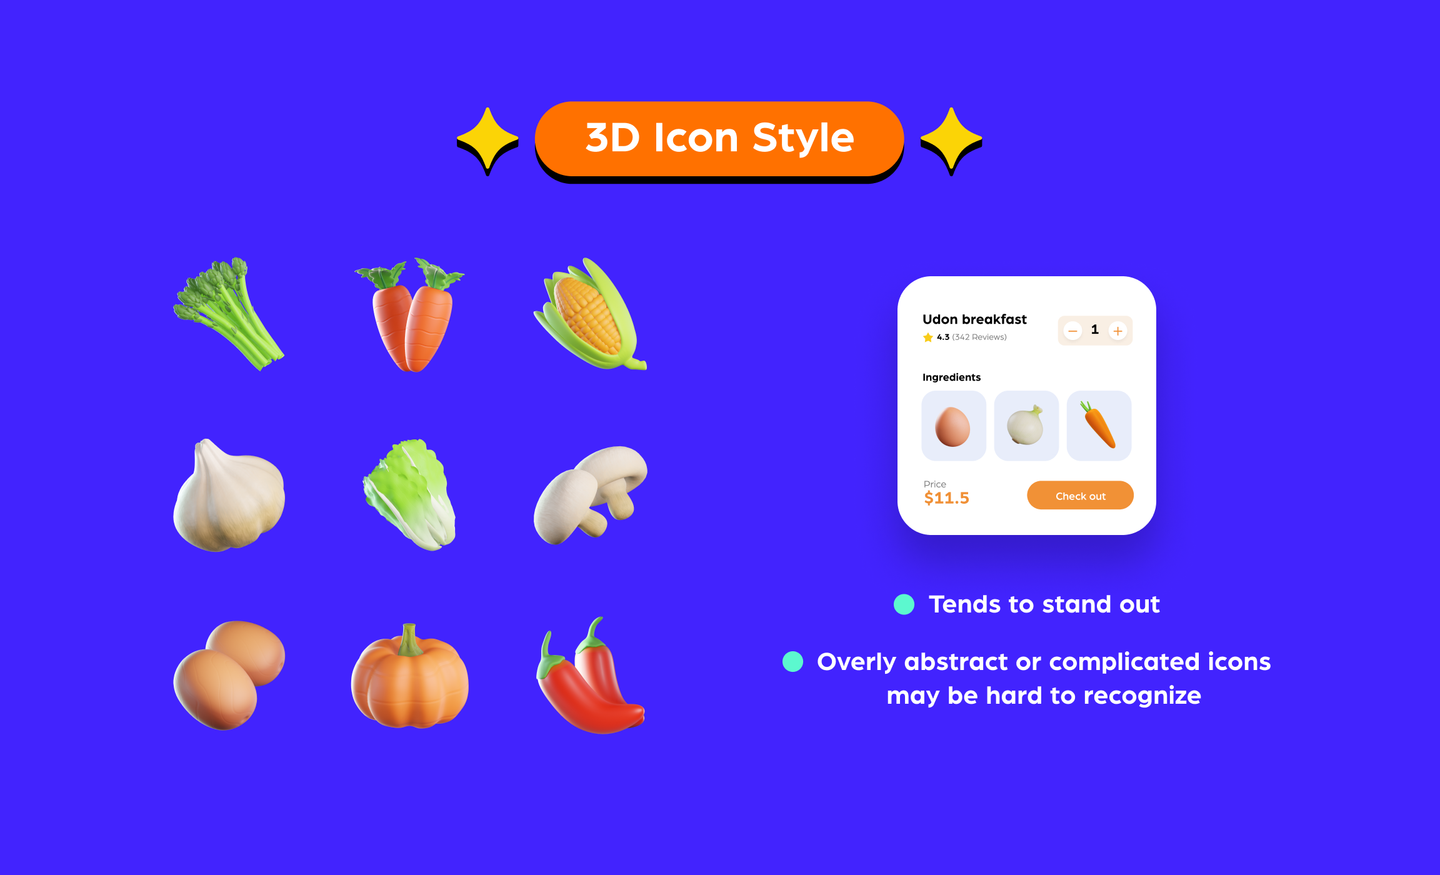 A guide to the 3d icon style